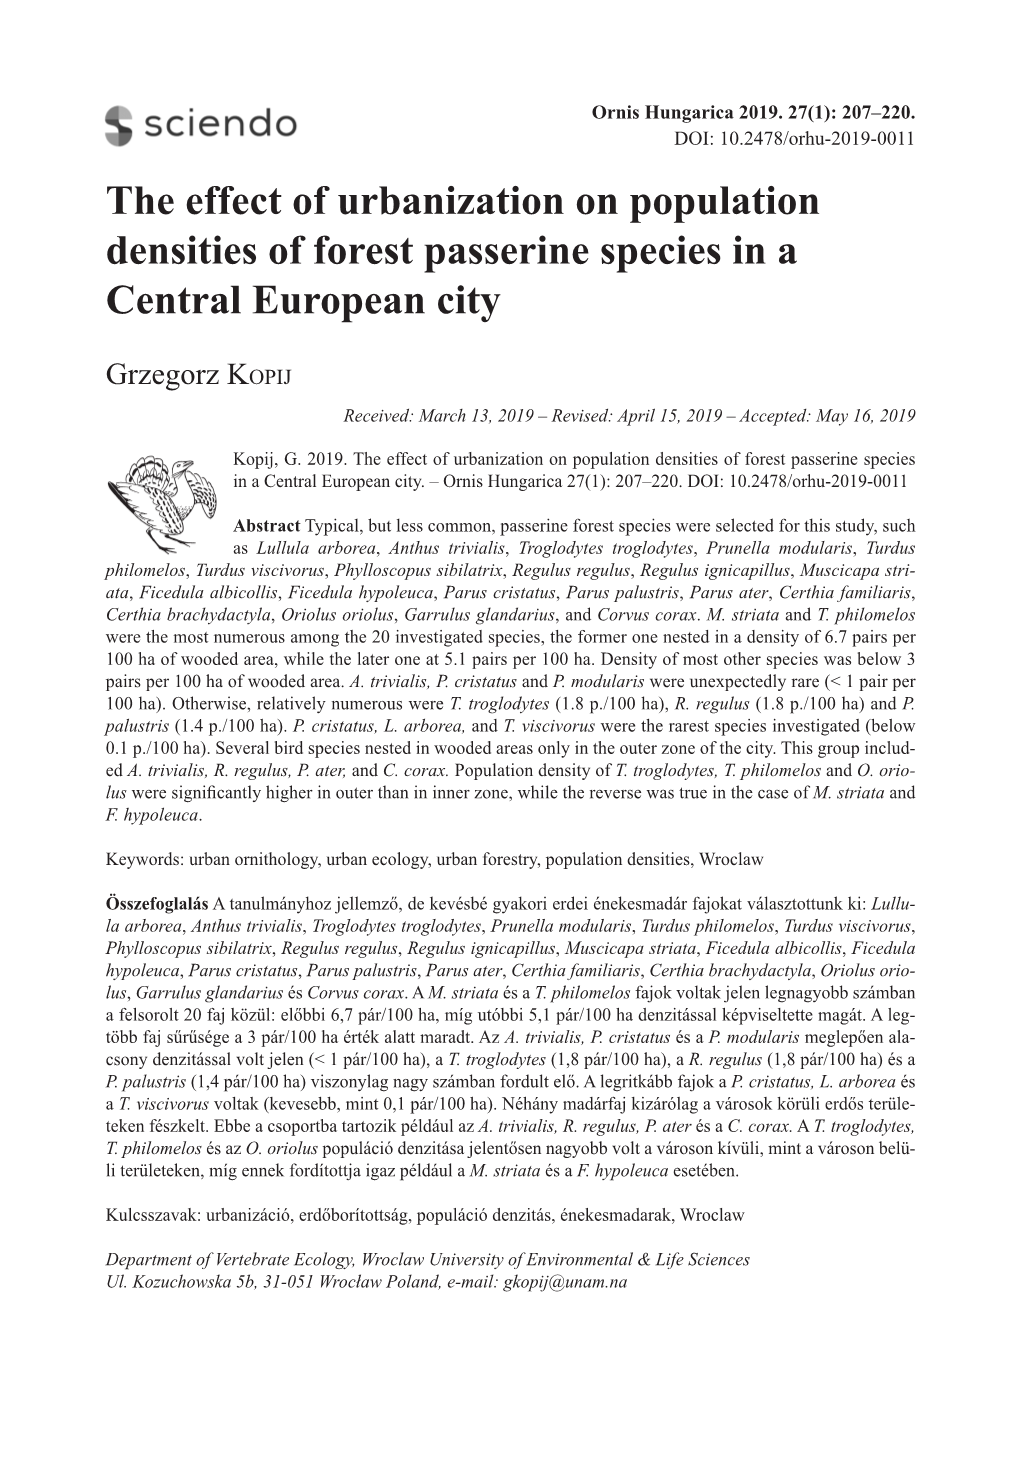 The Effect of Urbanization on Population Densities of Forest Passerine Species in a Central European City